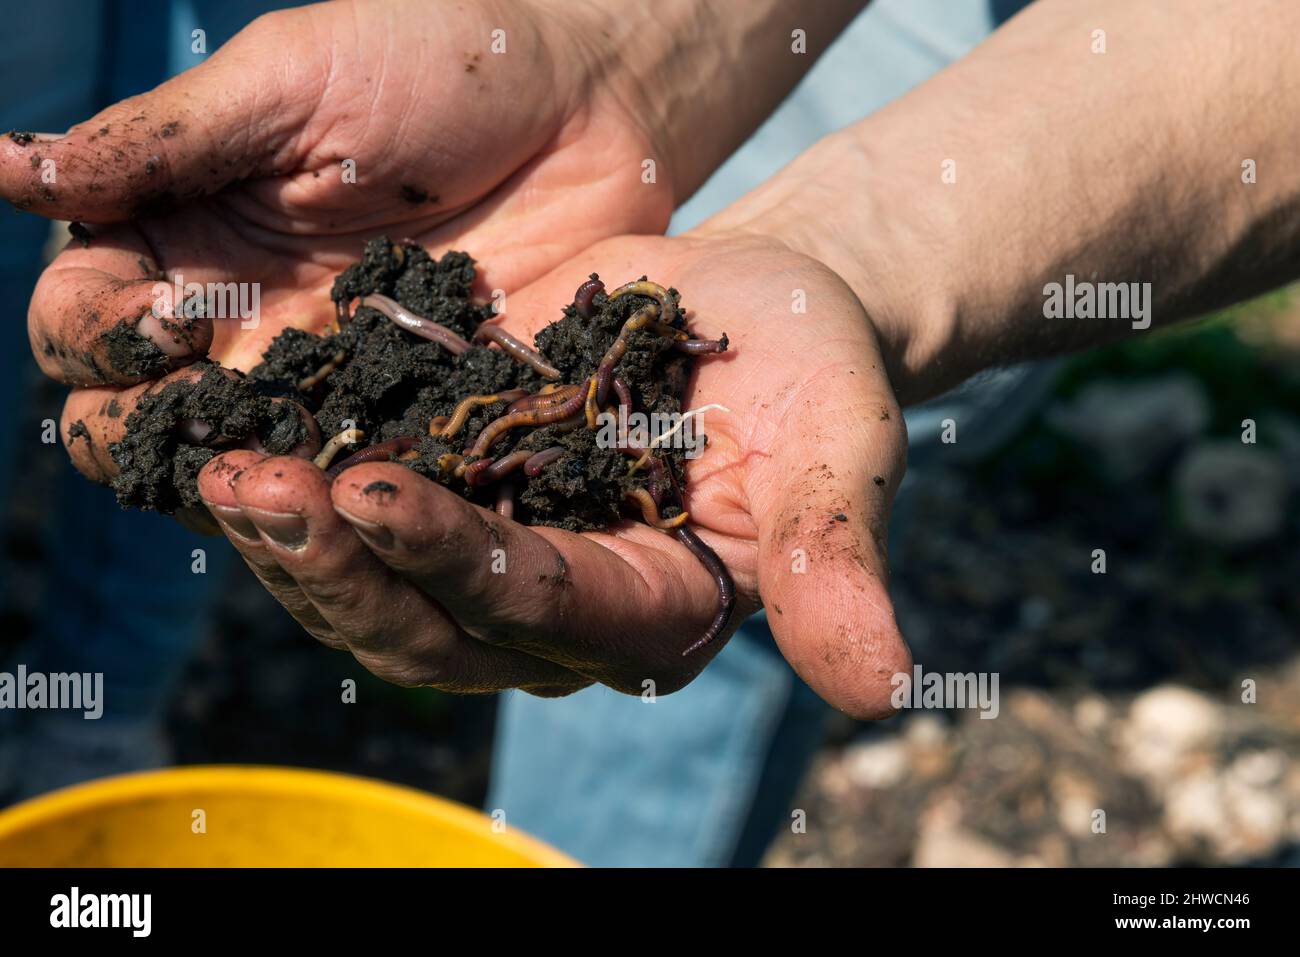 Hands holding worms with soil. A farmer showing group of earthworms in his hands. Production of vermicompost from household food waste. High quality photo Stock Photo